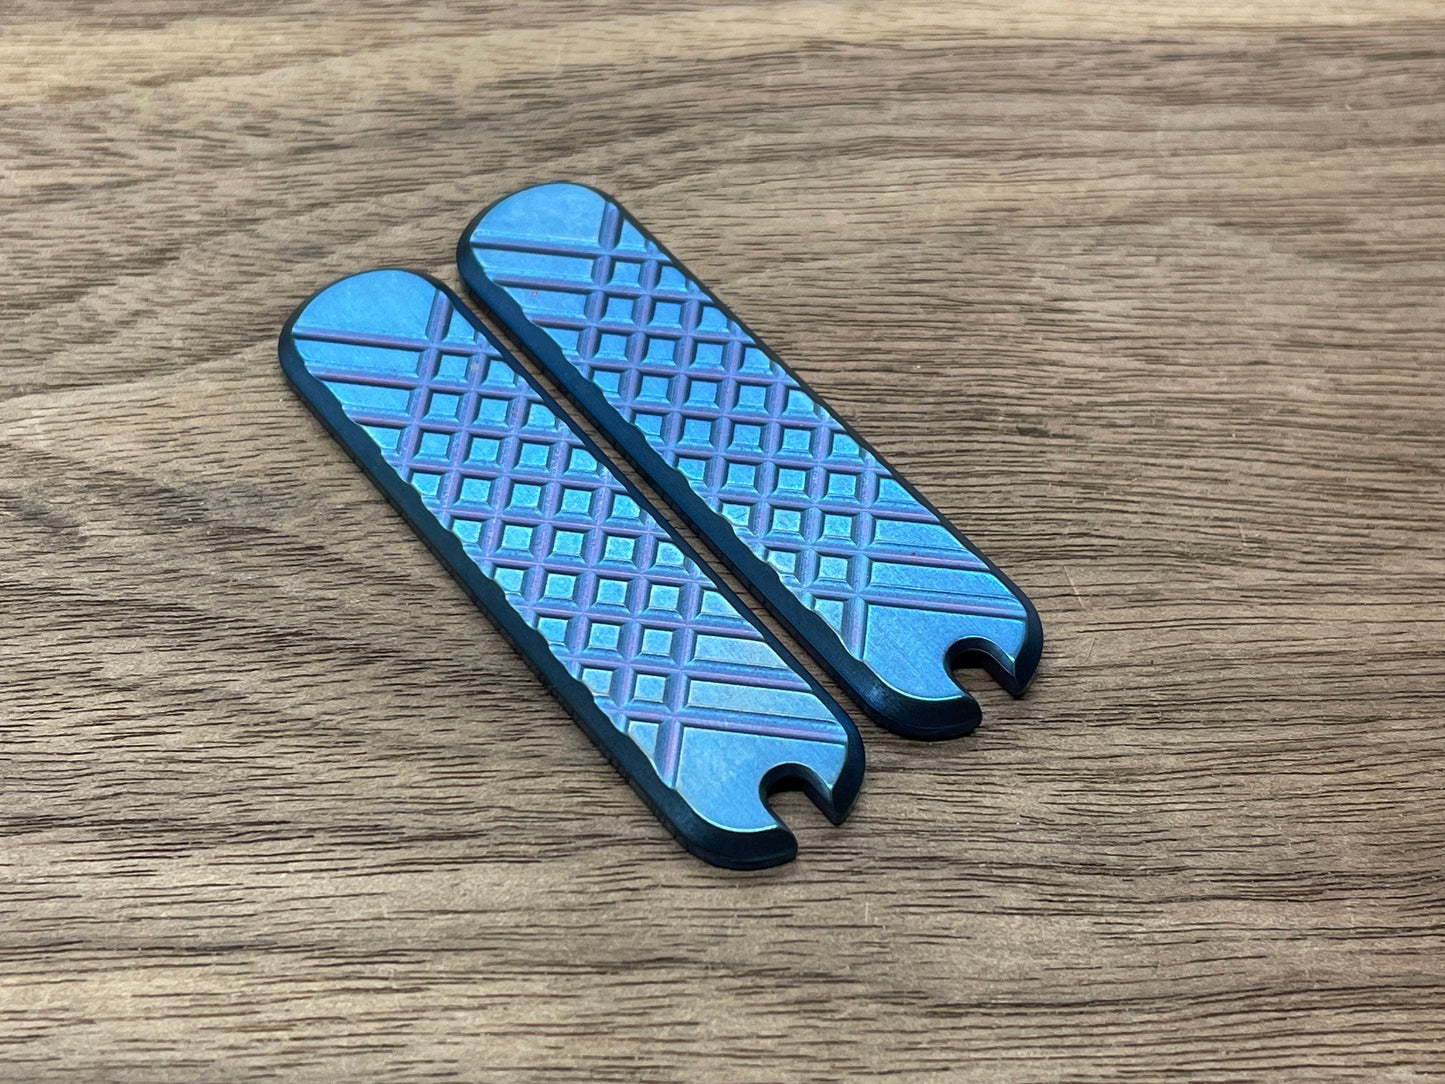 Stone Washed Blue ano FRAG Cnc milled 58mm Titanium Scales for Swiss Army SAK